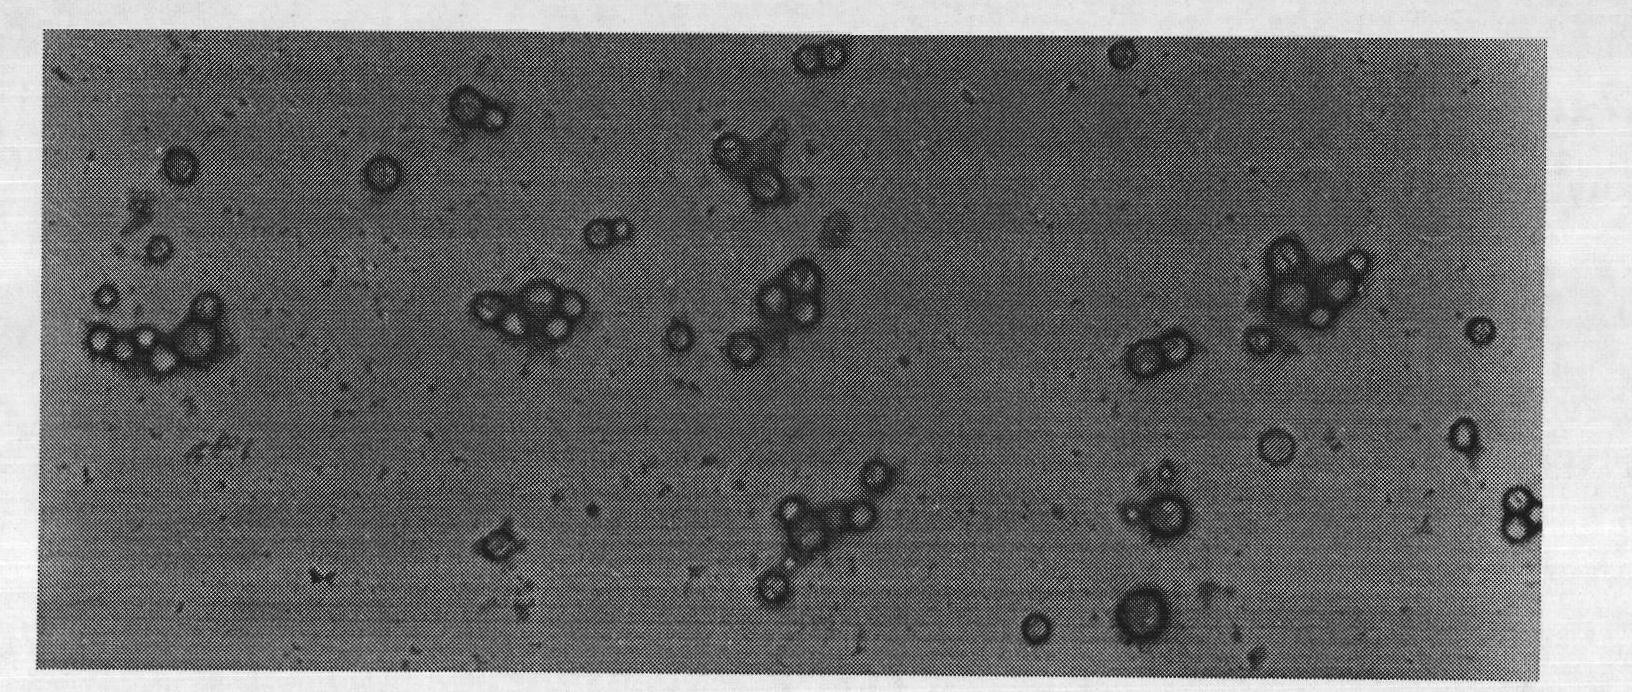 Preparation method of polyene-containing taxol nanoparticle mixed micelle preparation and freeze-drying agent